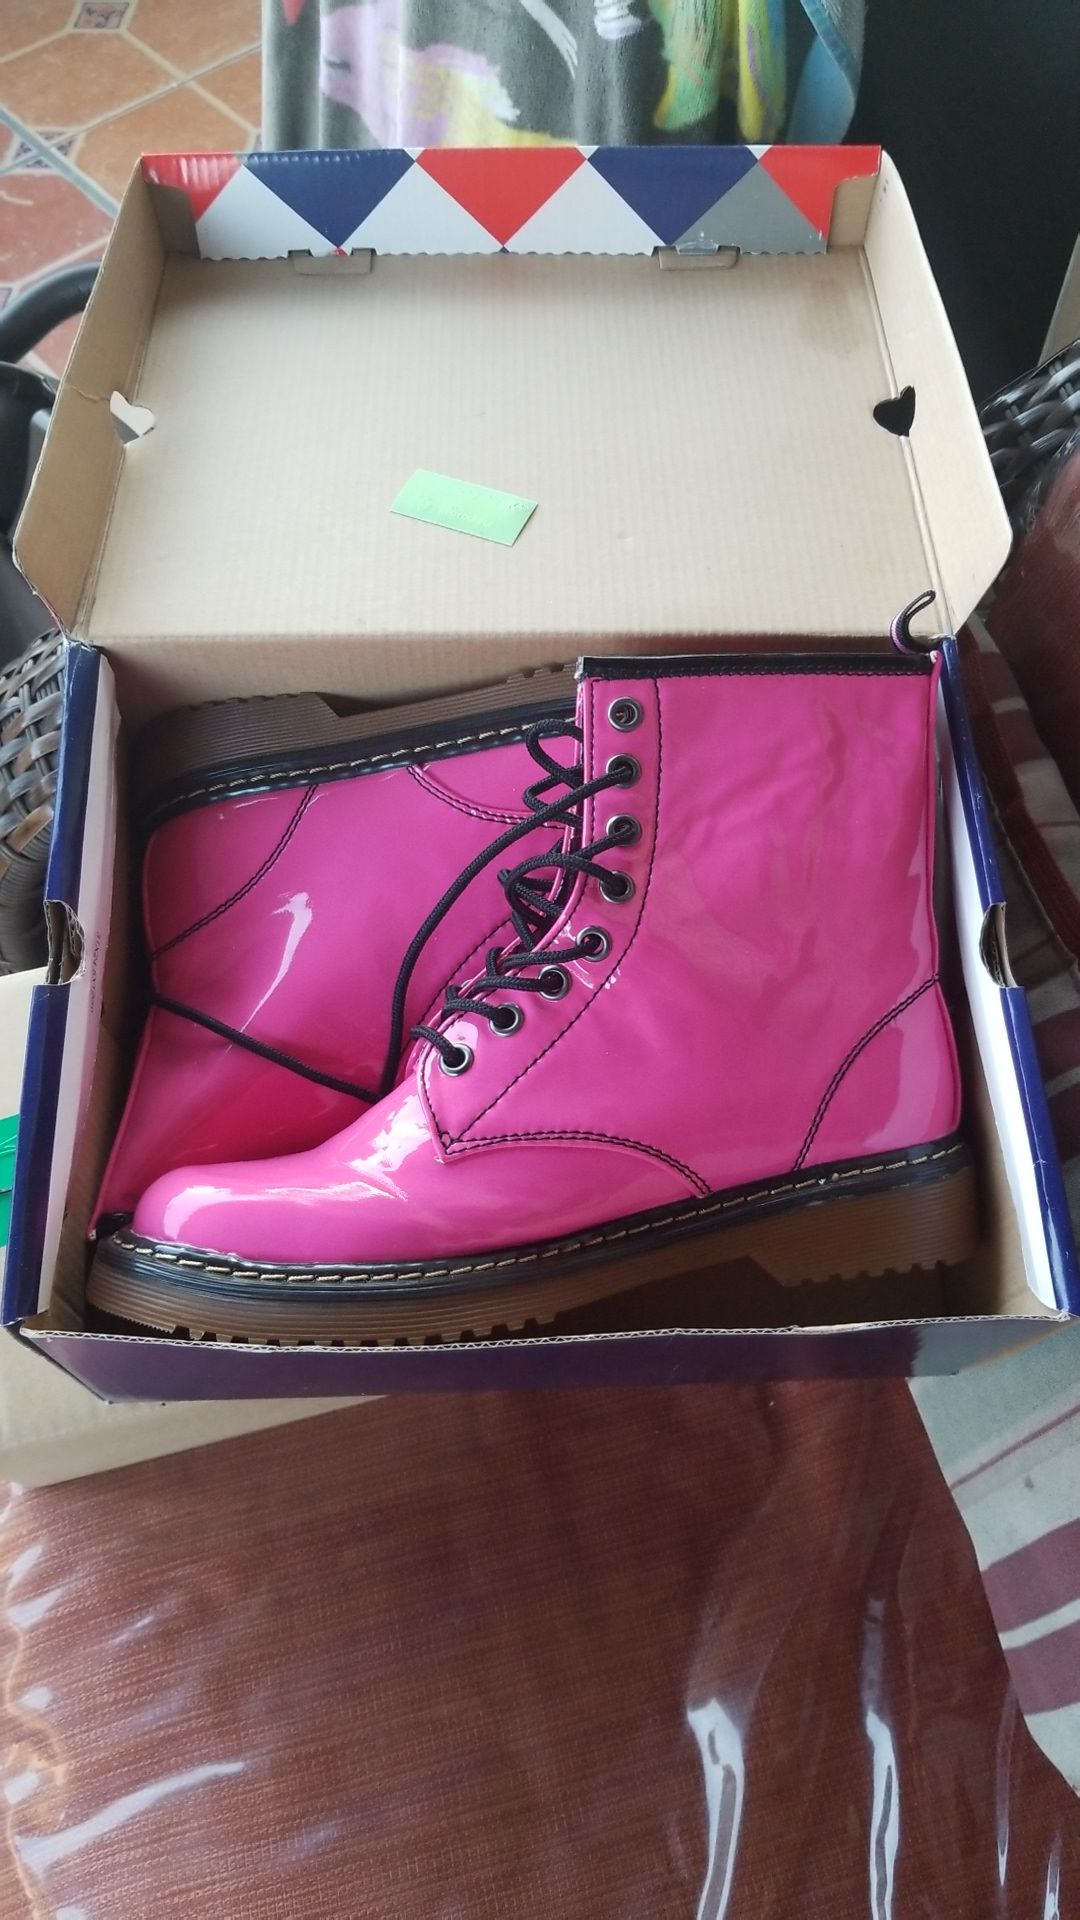 Hot pink boots